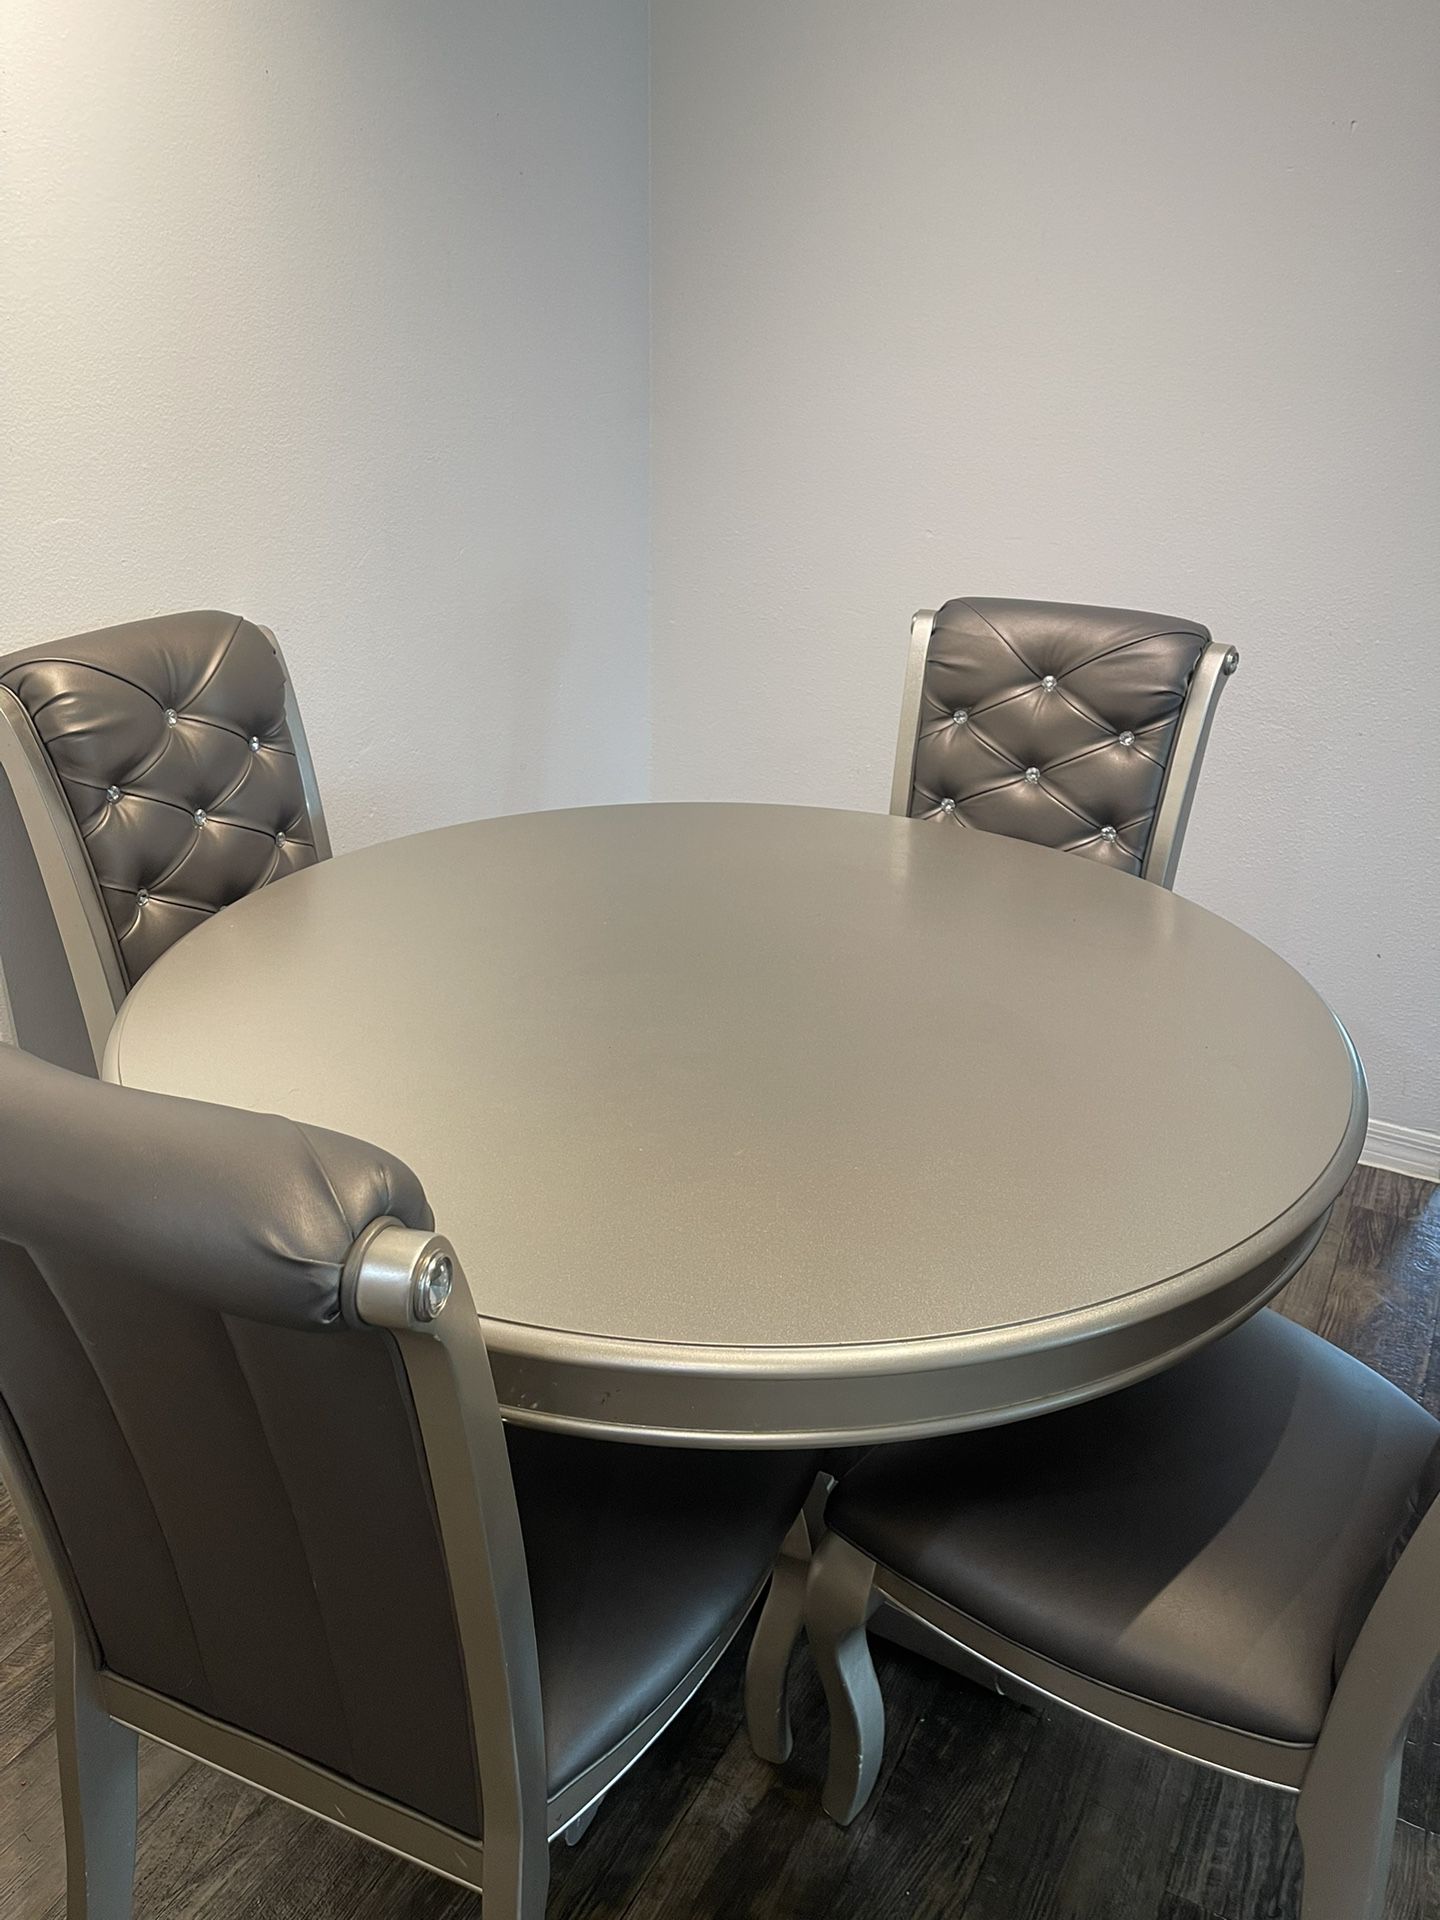 Gray table with Chairs 